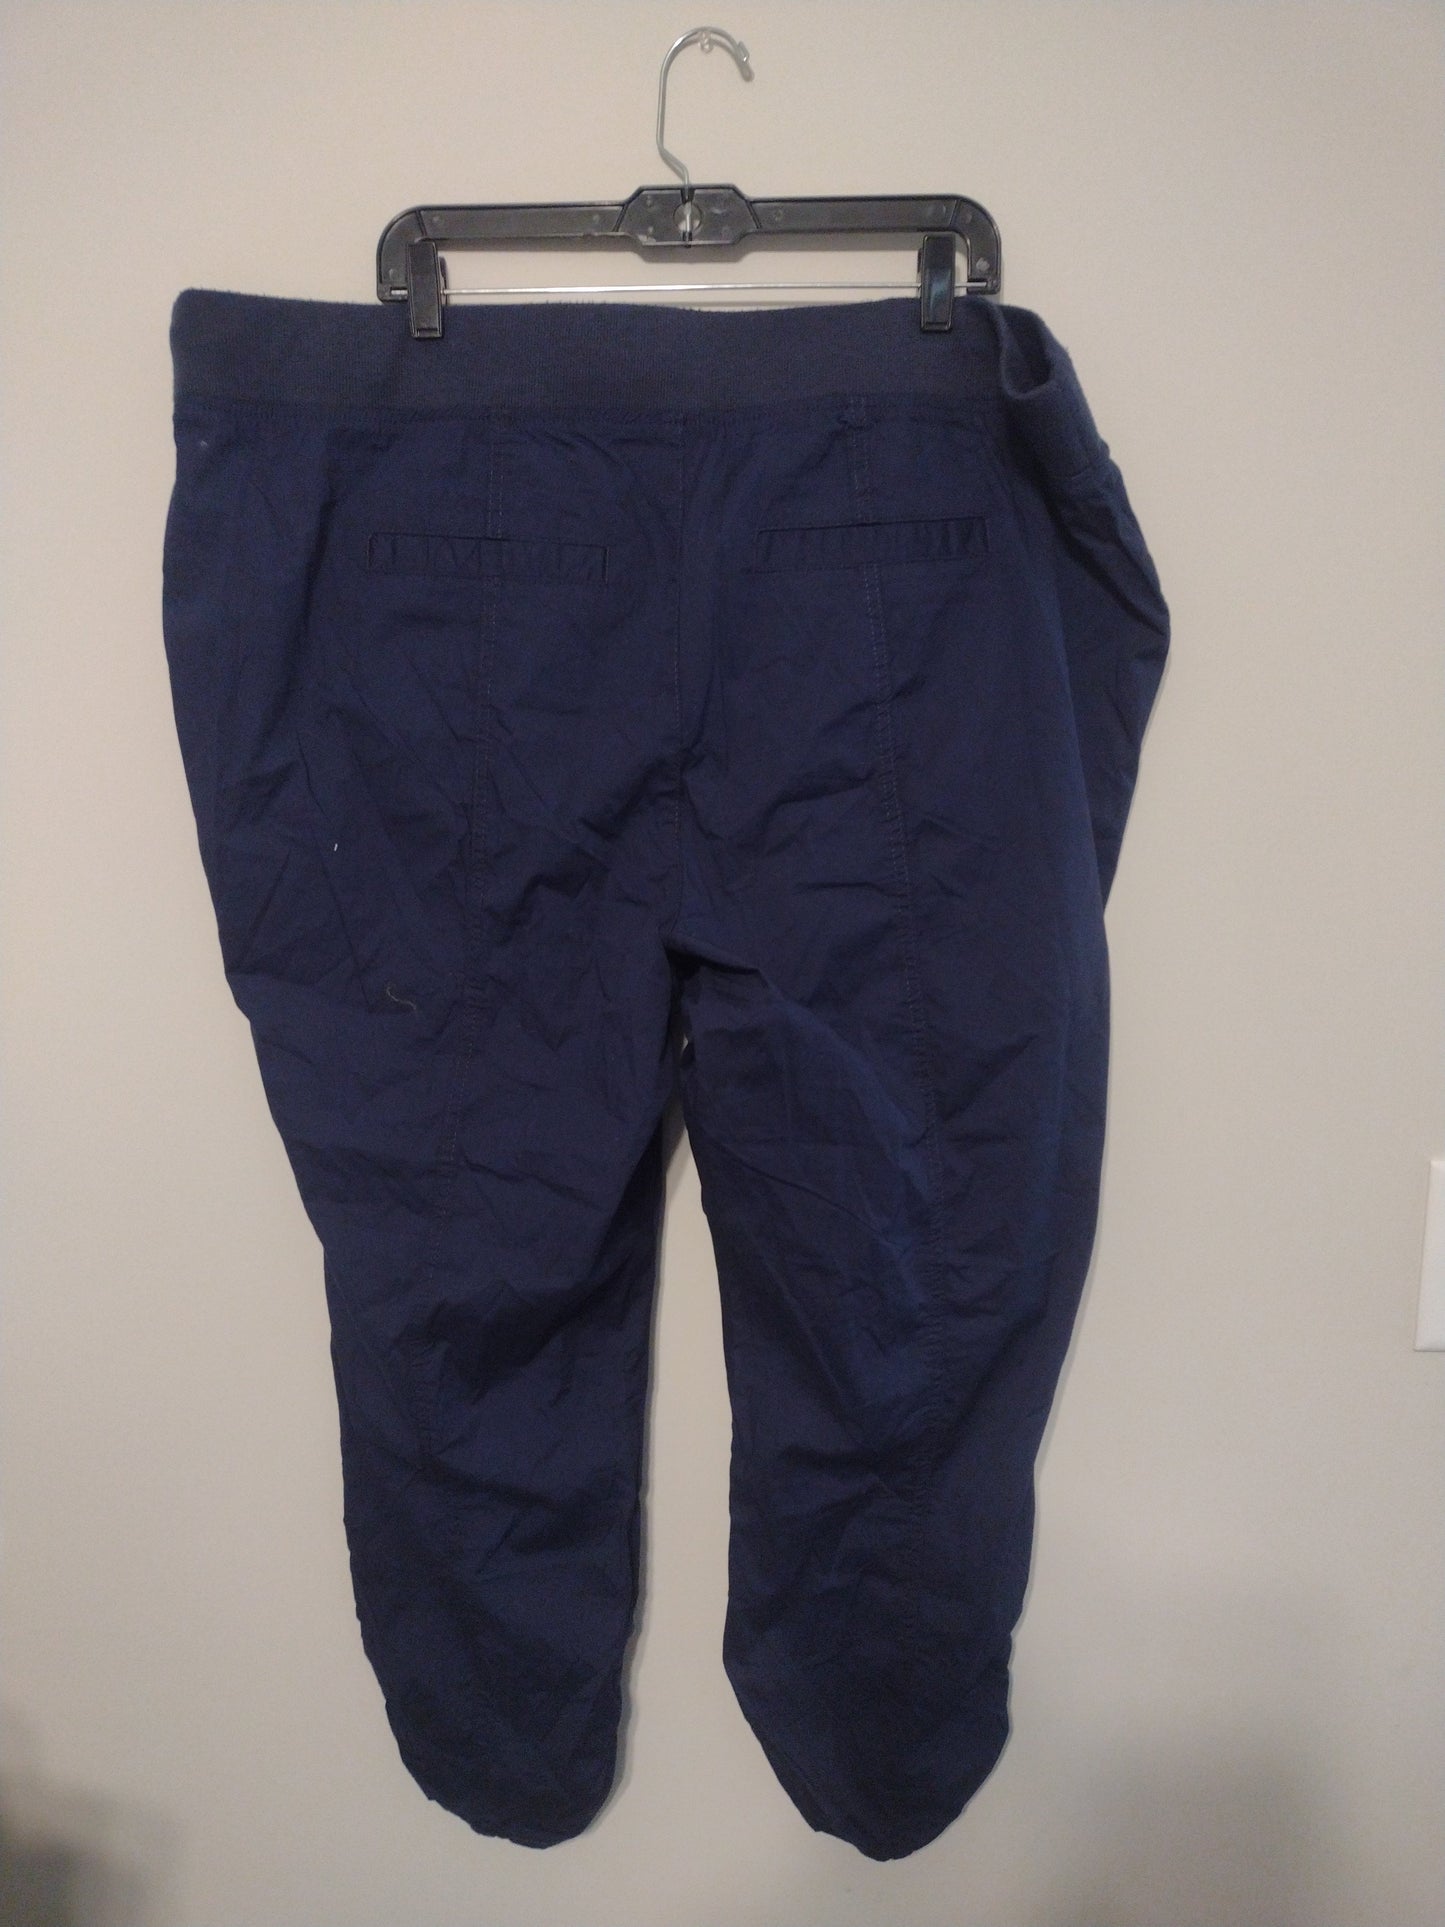 Pants Ankle By Torrid  Size: 3x